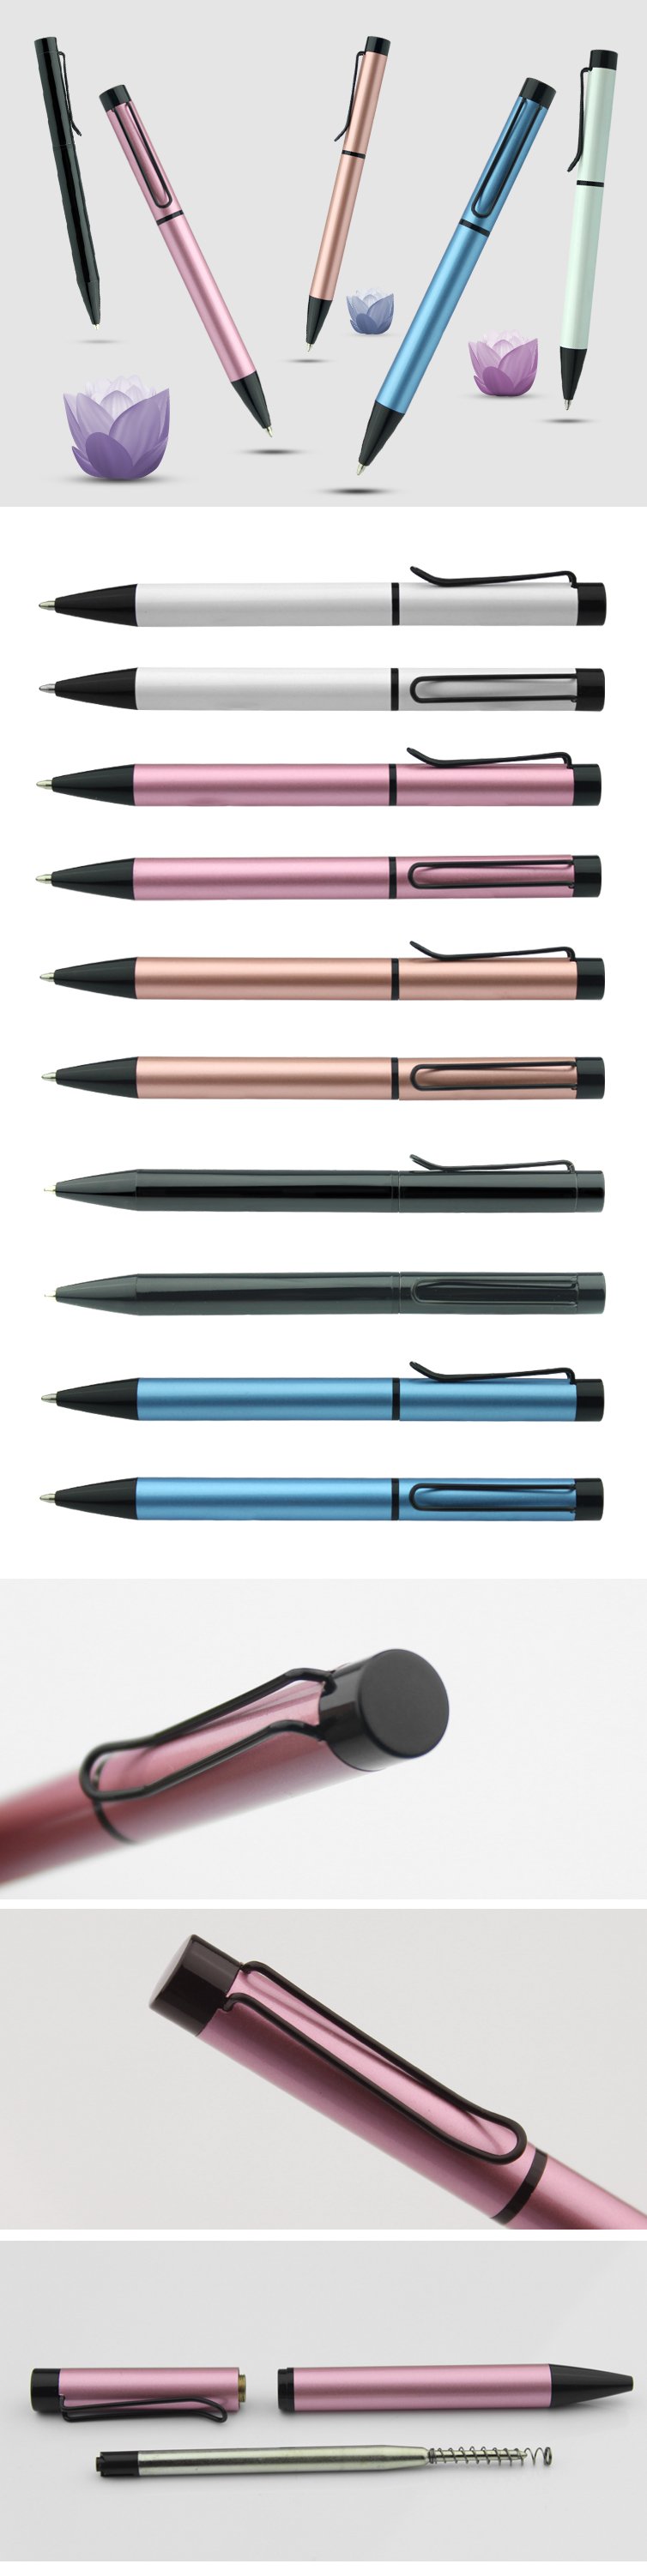 2016 Lovely Metal Pens New Style Promotional Pen